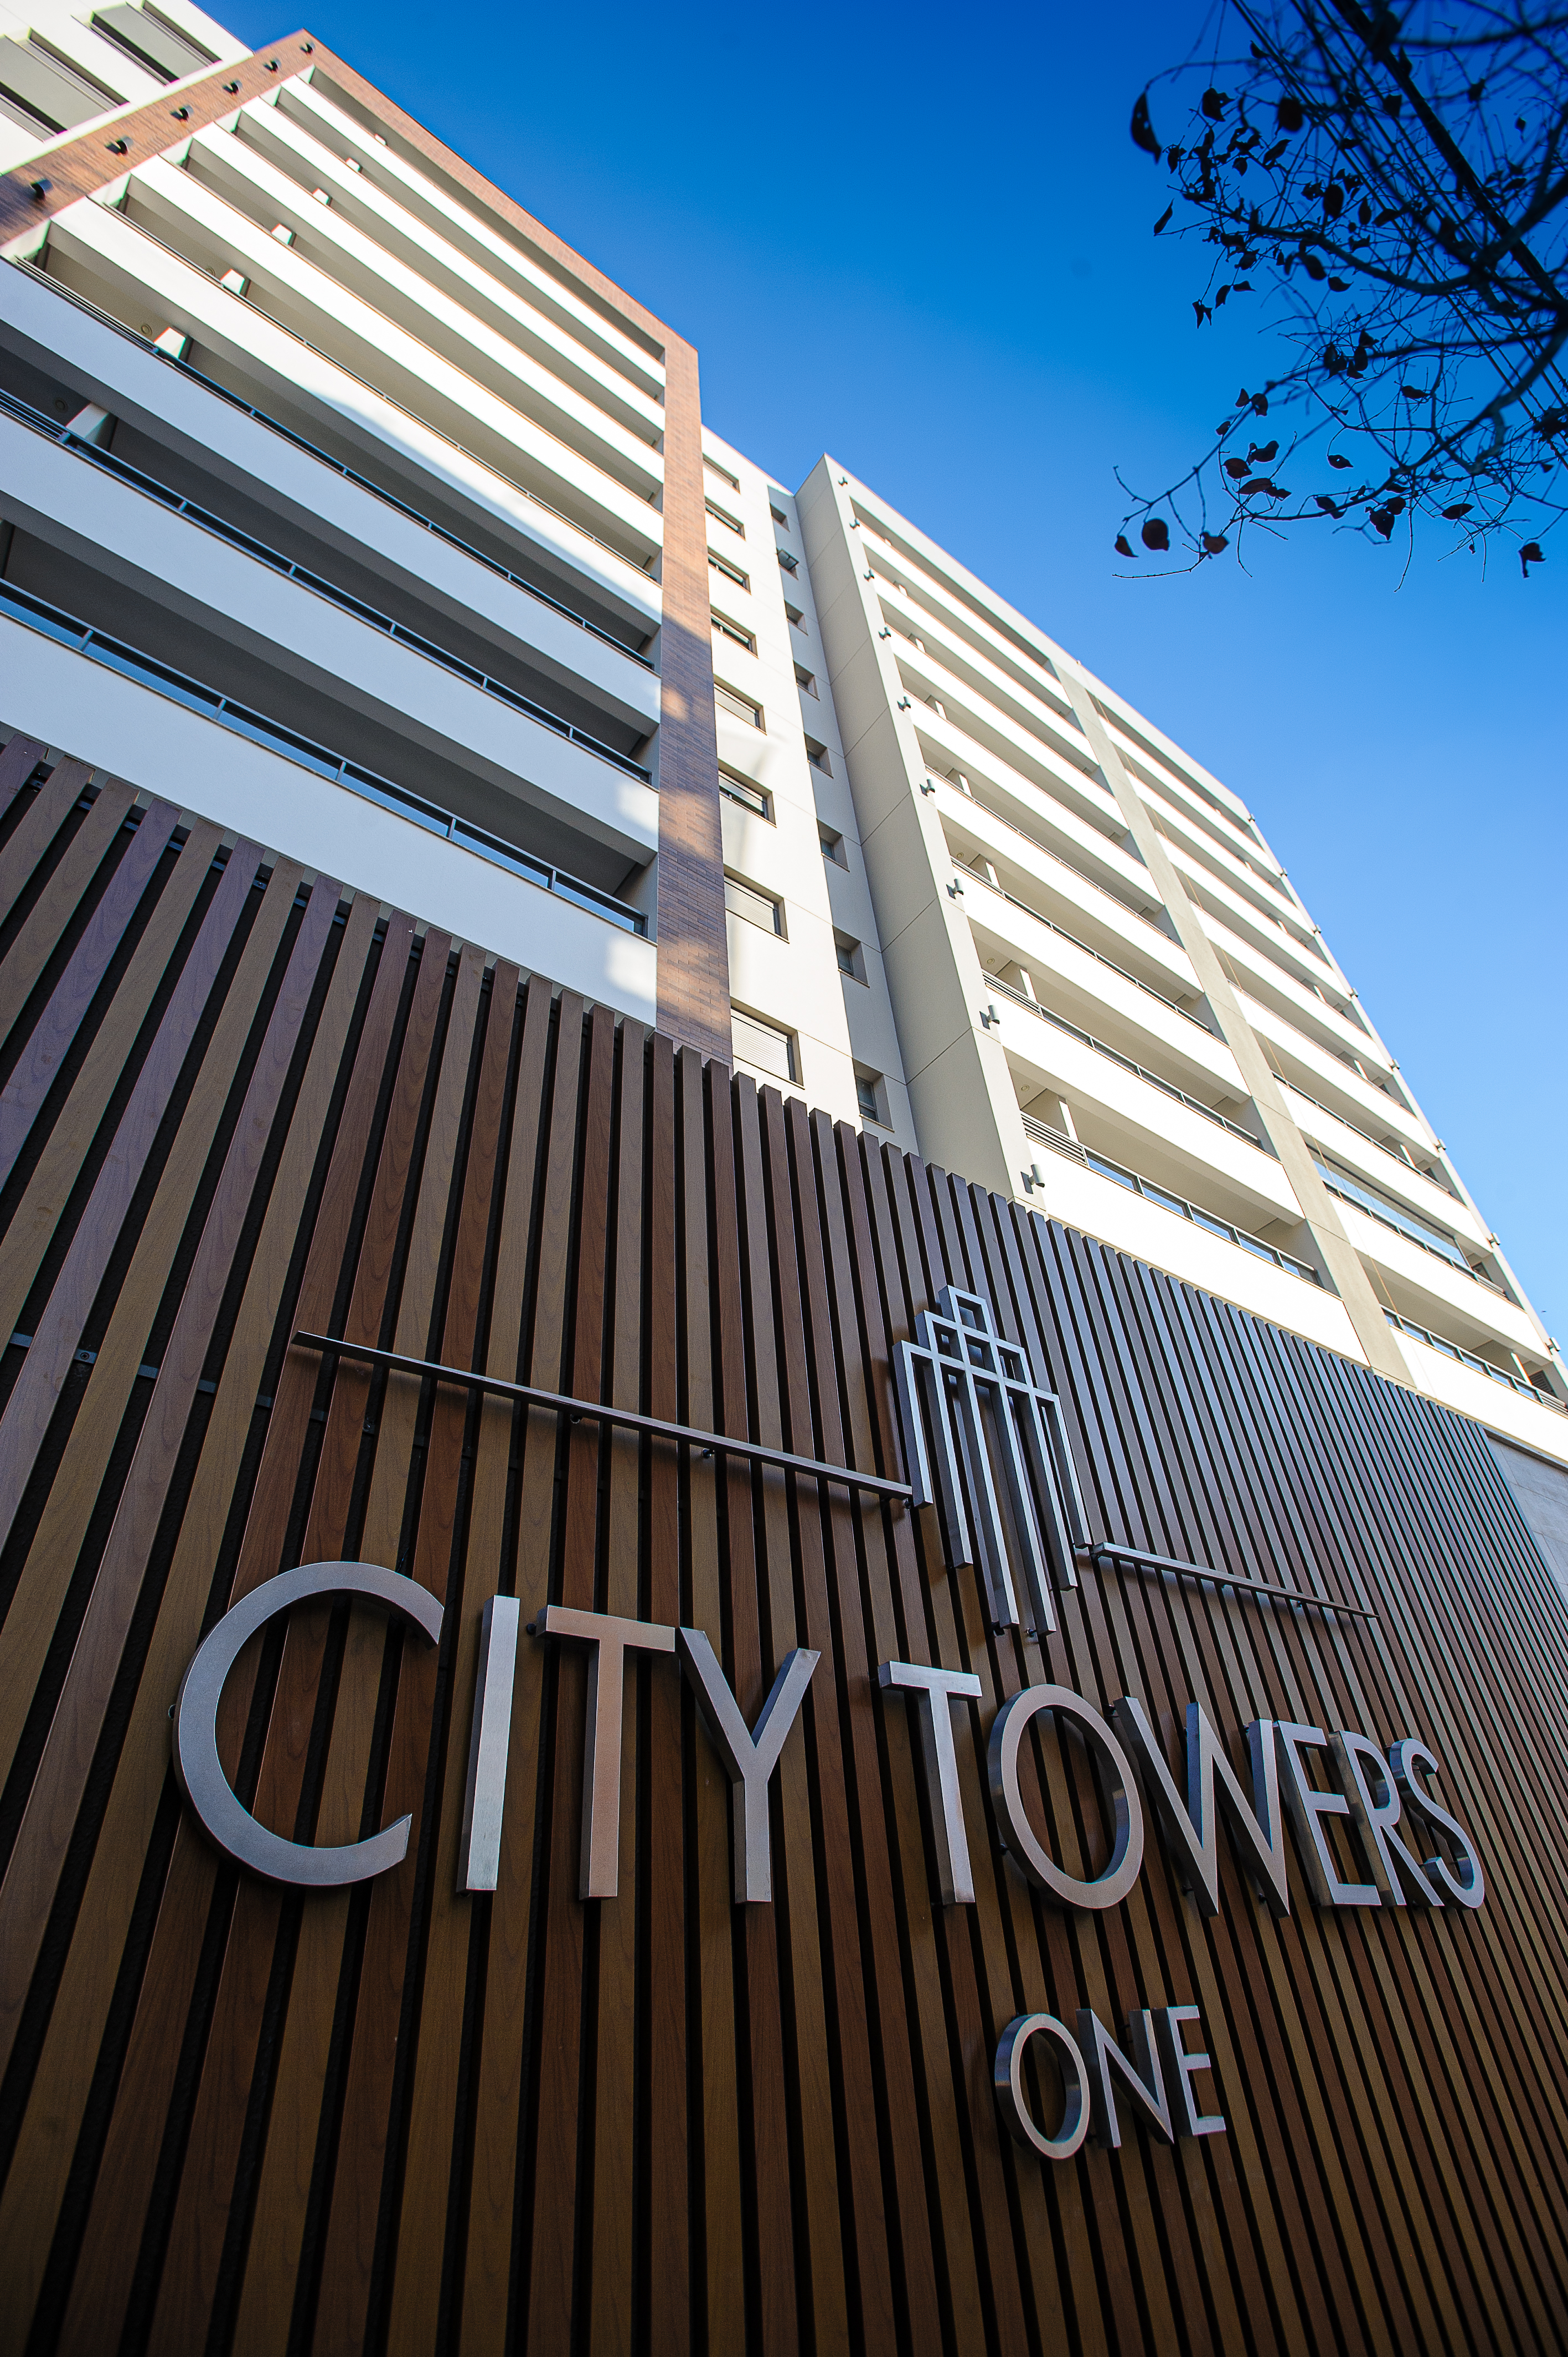 City Towers